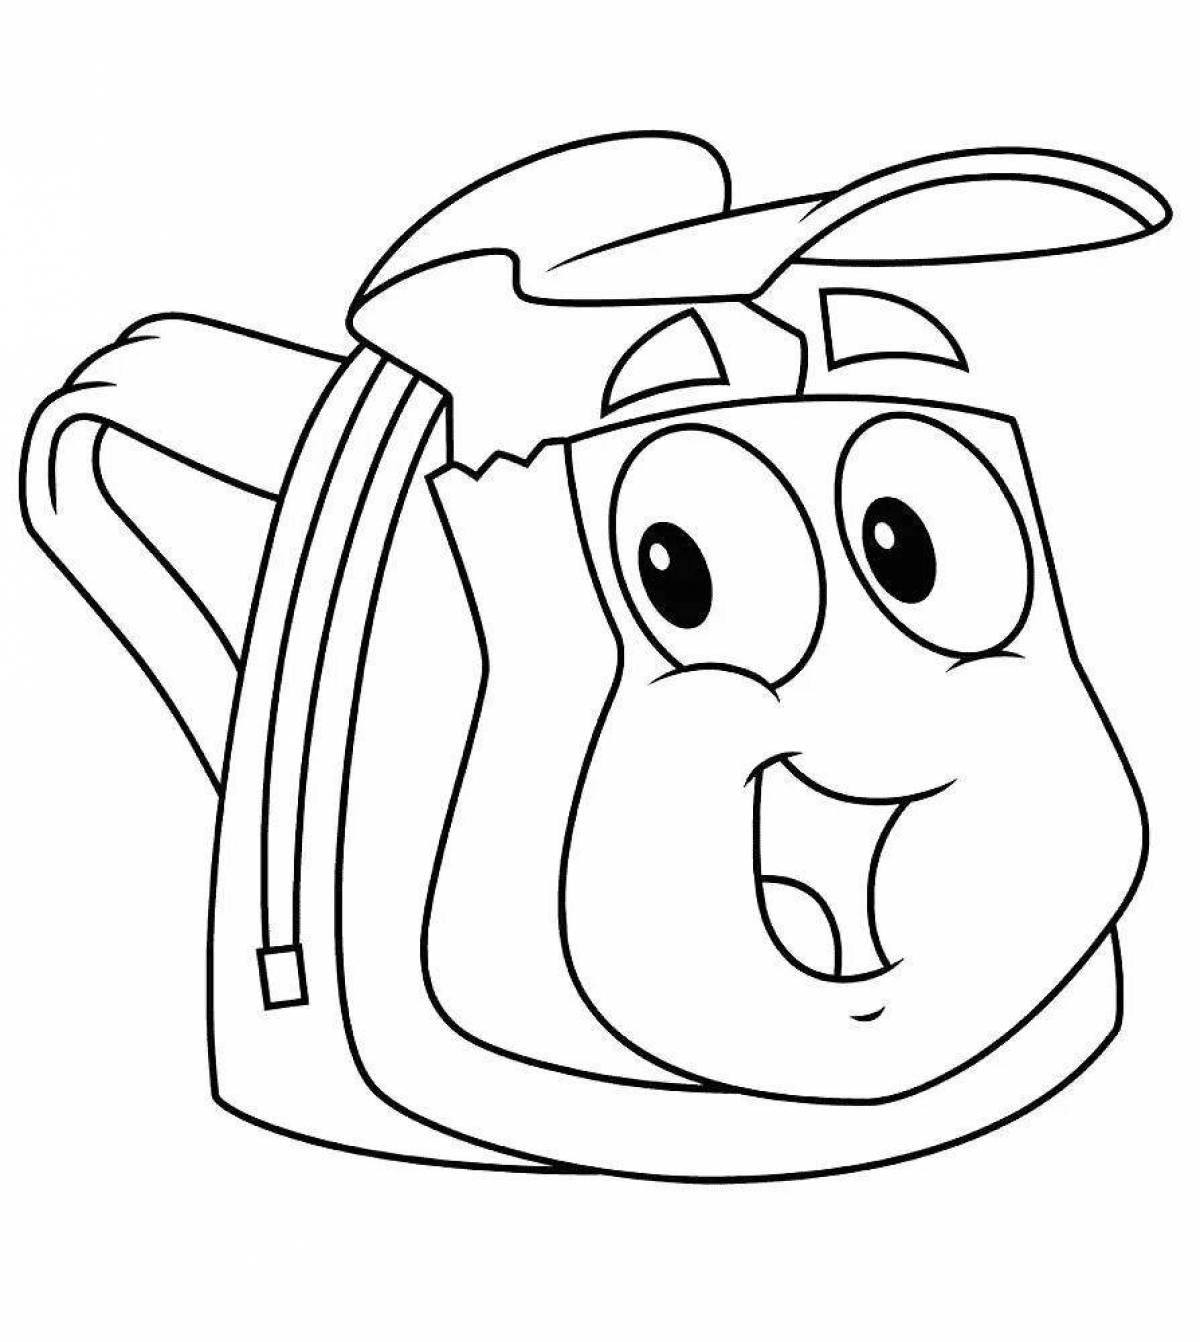 Colorful and playful backpack coloring book for kids